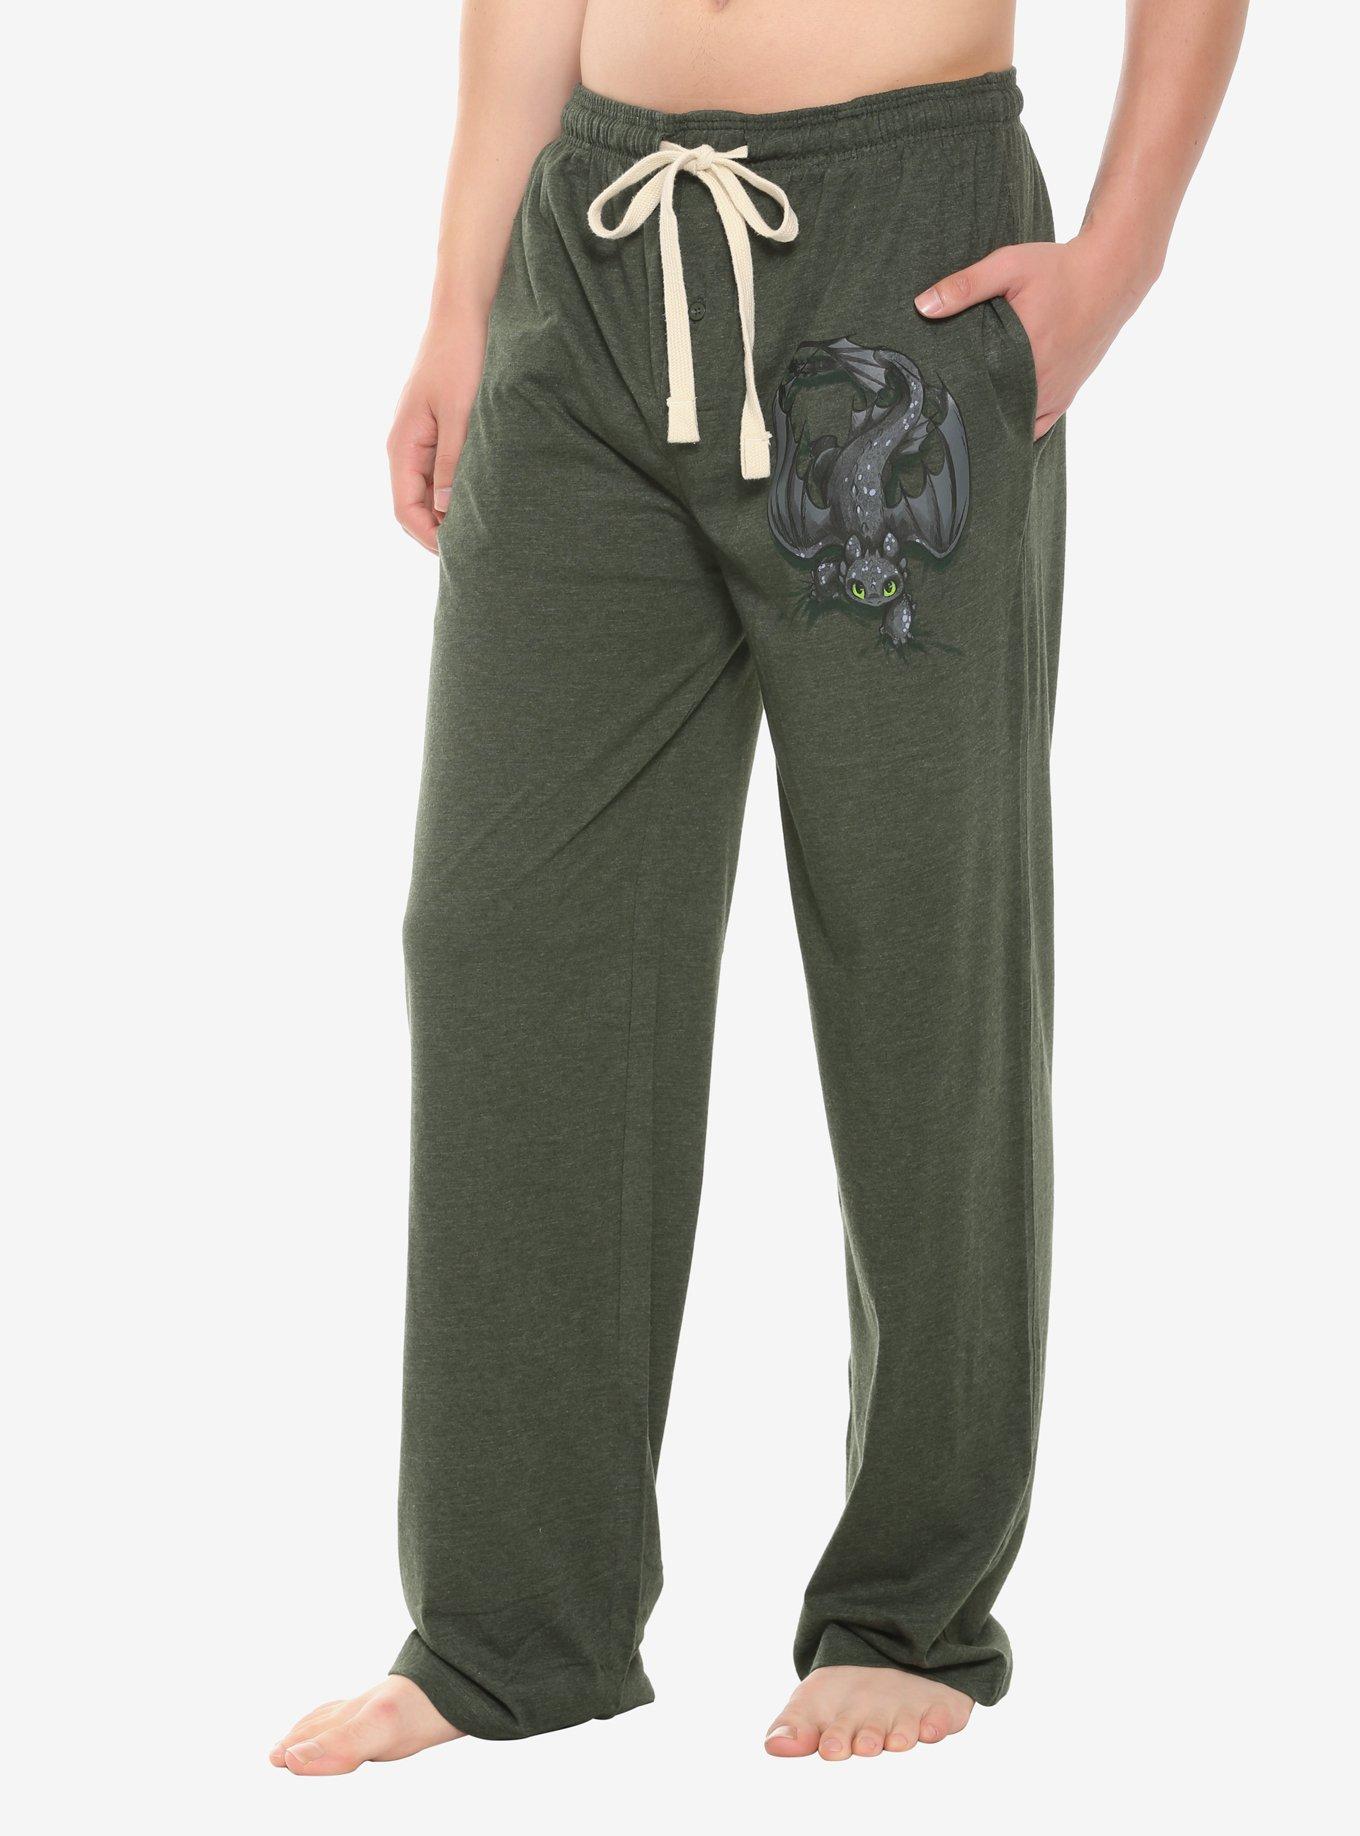 How To Train Your Dragon Toothless Pajama Pants, MULTI, hi-res